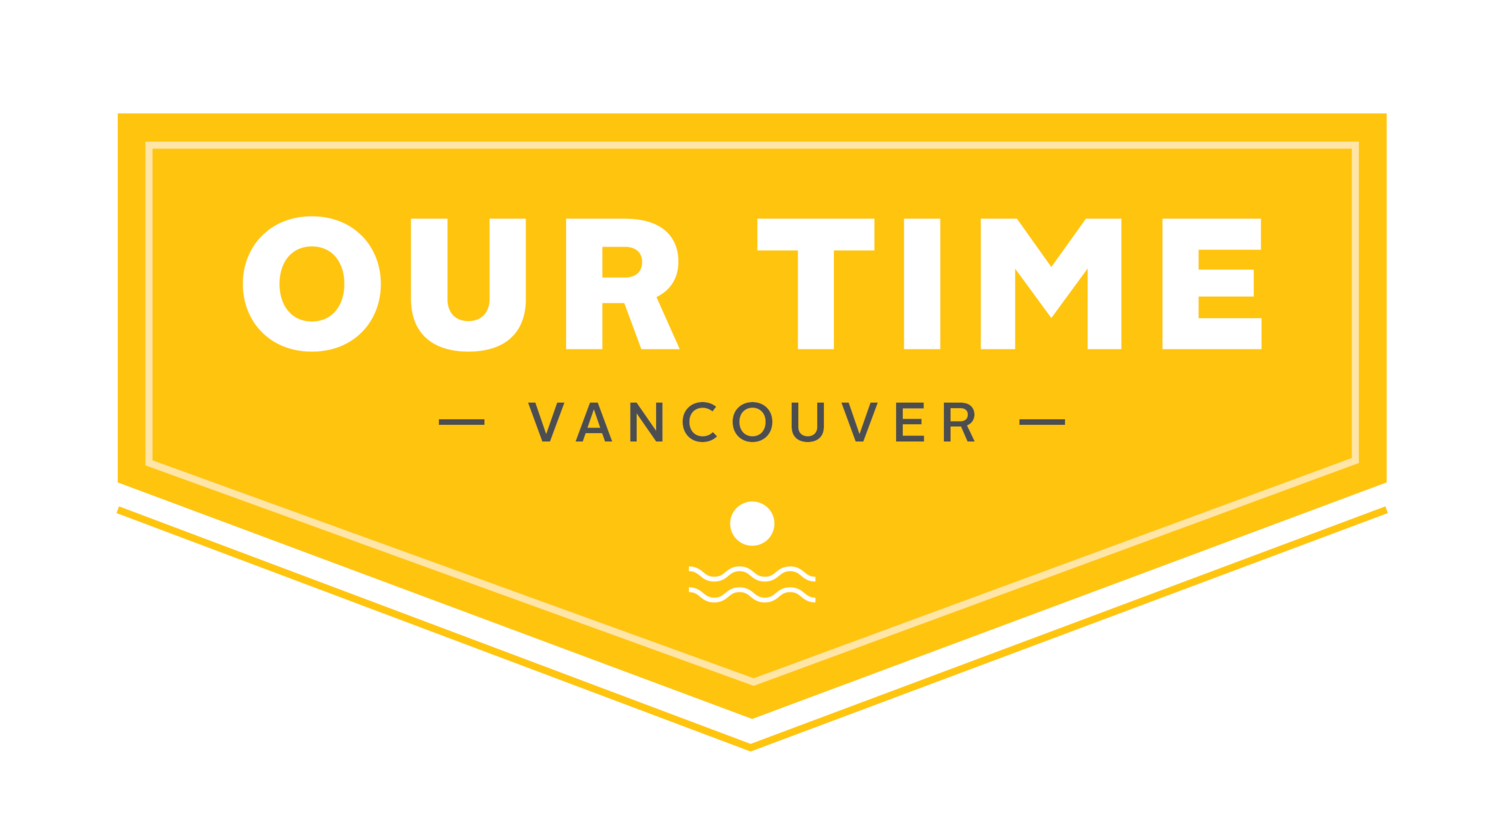 Our Time Vancouver